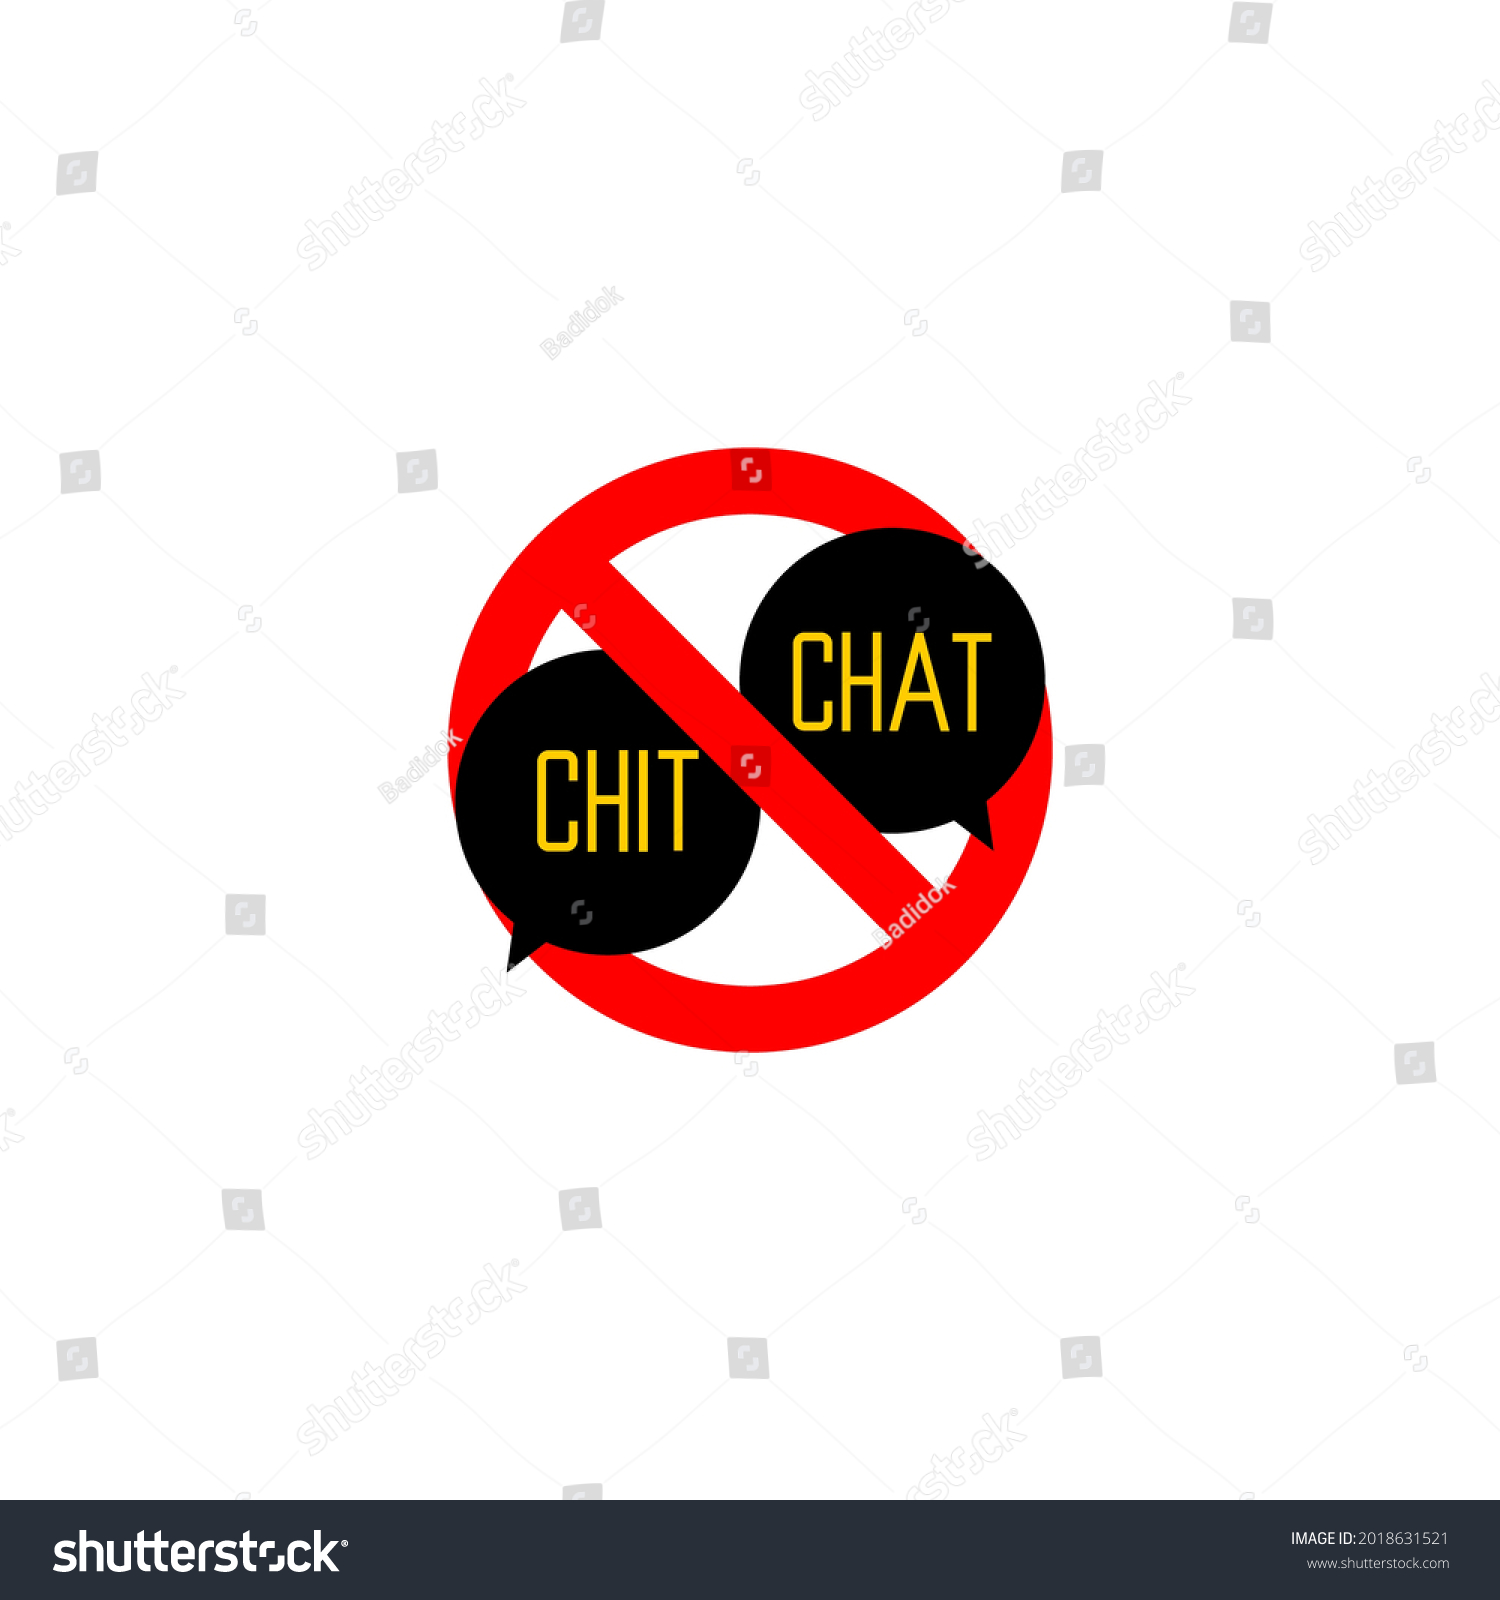 Chat chit “chit